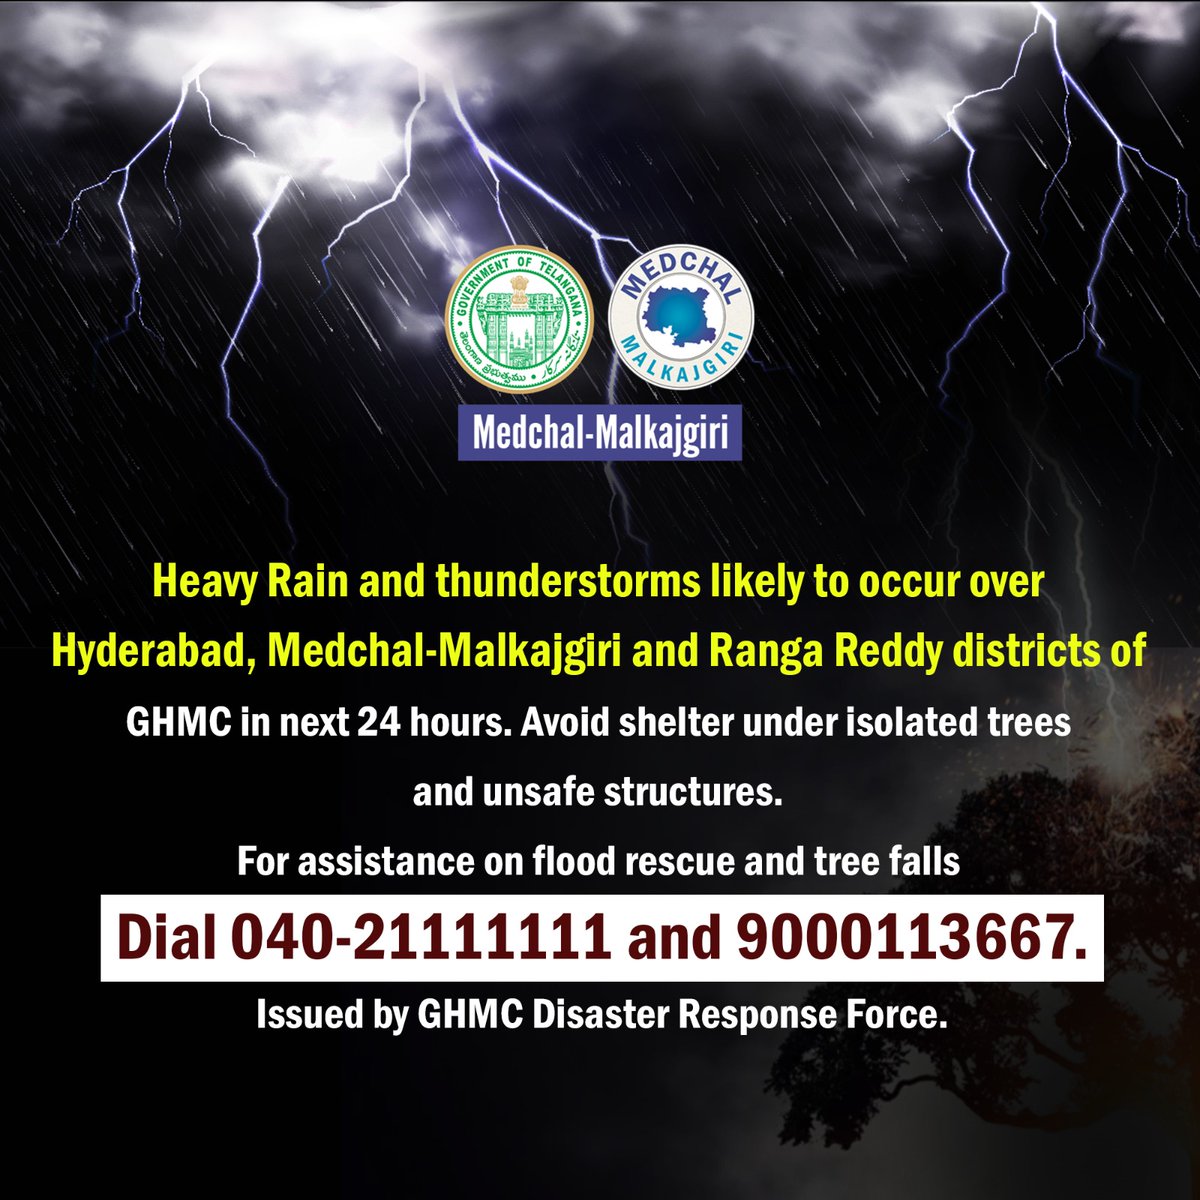 Heavy Rain and thunderstorms likely to occur over #Hyderabad, #MedchalMalkajgiri and #RangaReddy districts of GHMC in next 24 hours. For assistance on flood rescue and tree falls dial 040-21111111 and 9000113667. Medchal-Malkajgiri Collectorate help line number 94924 09781